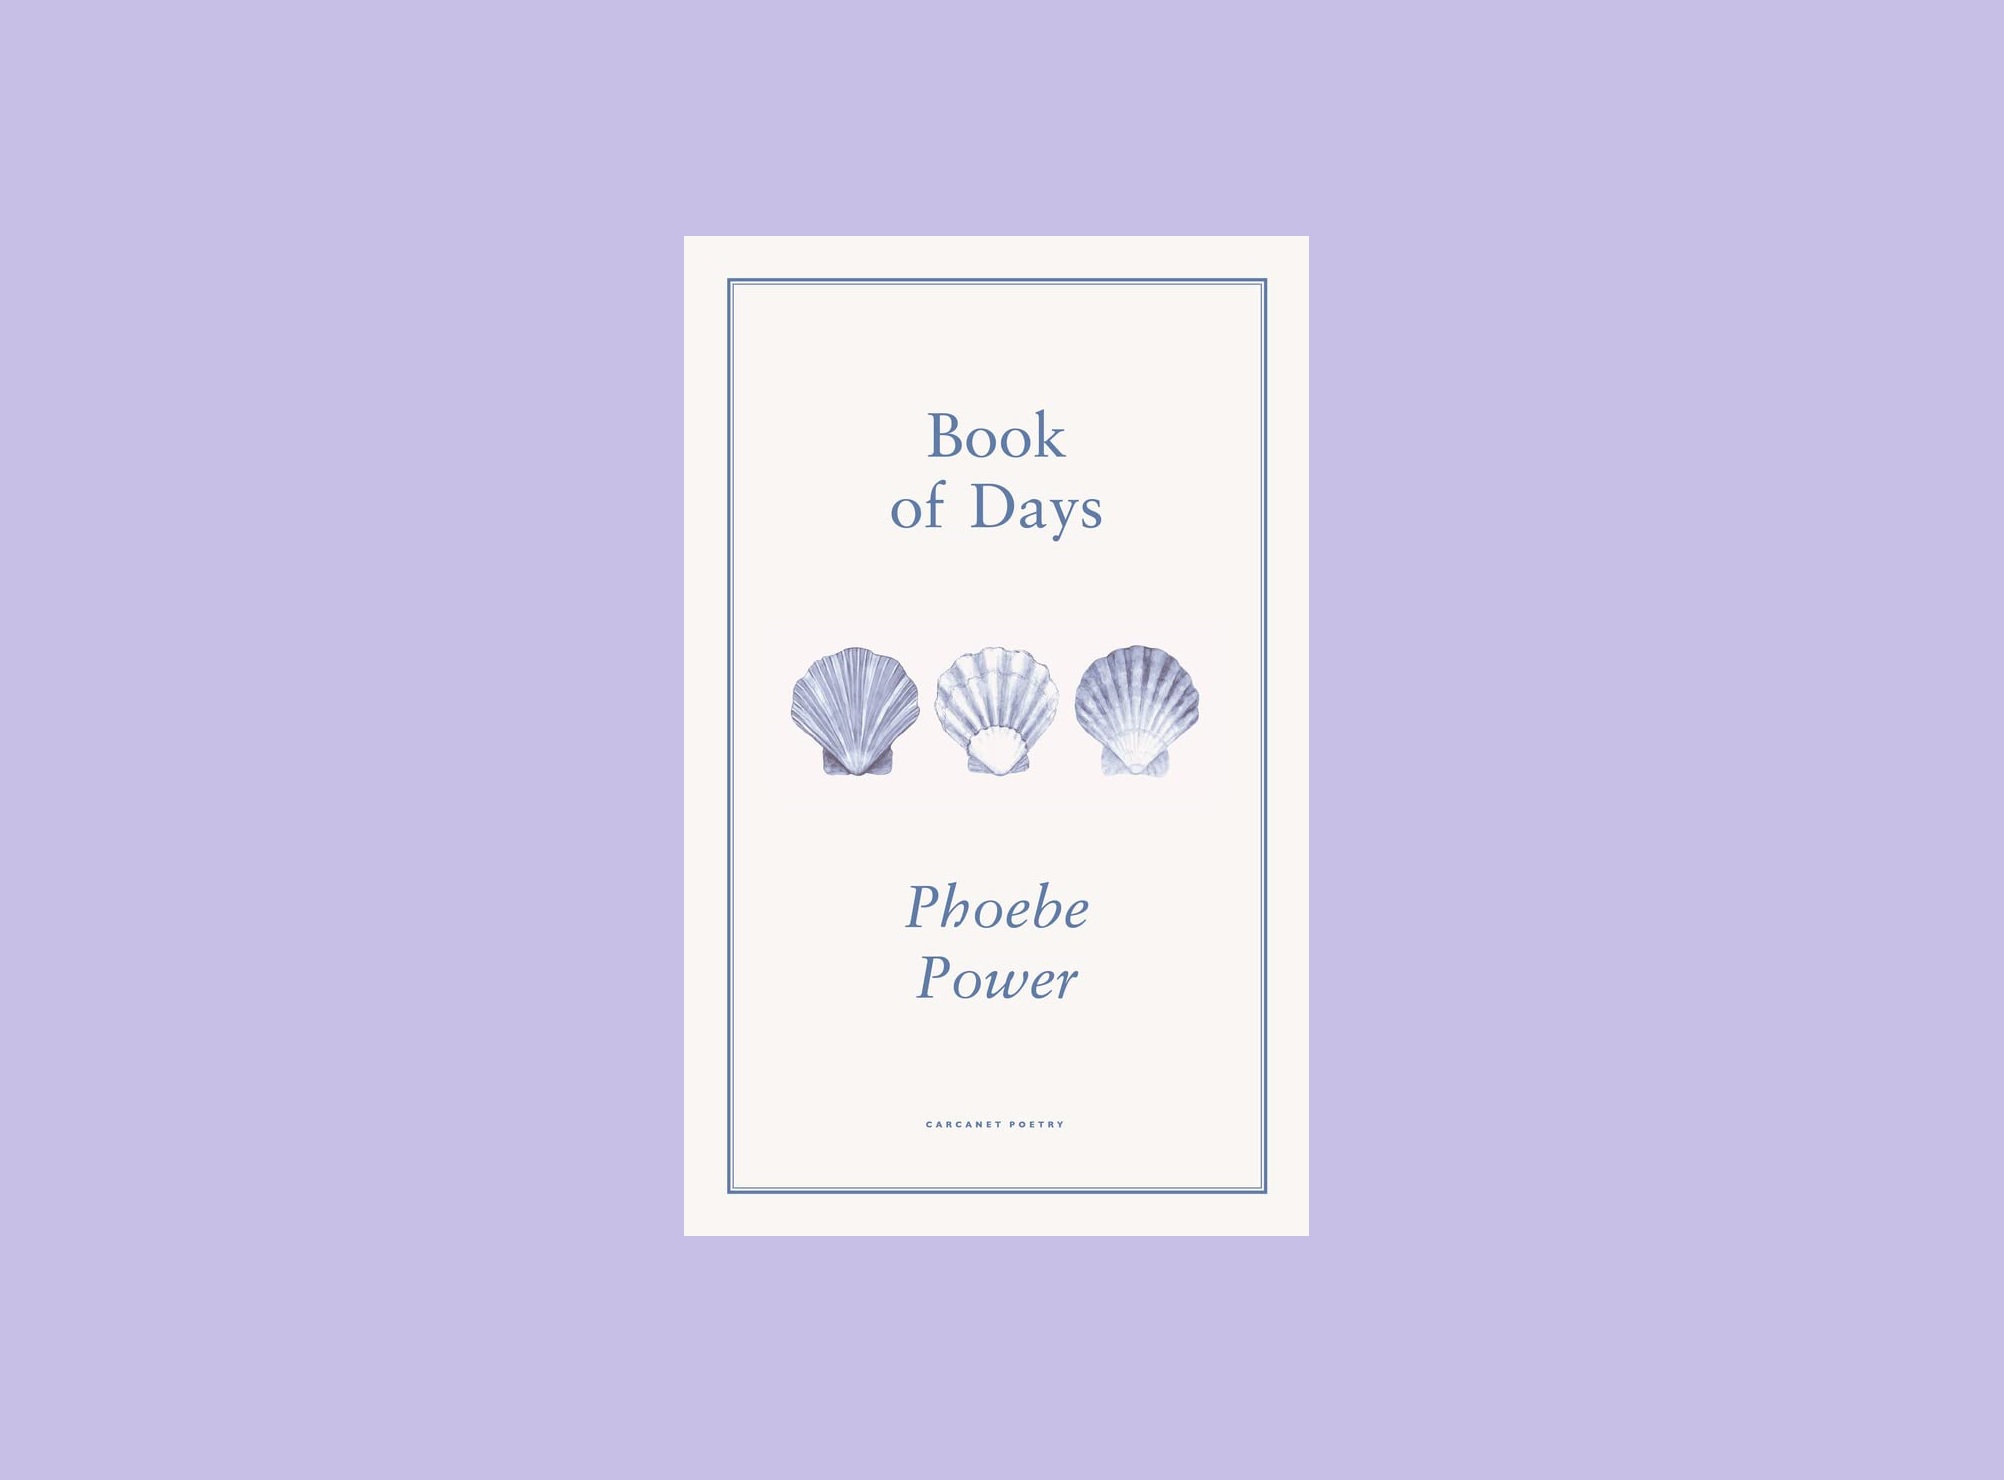 On ‘Book of Days’ by Phoebe Power